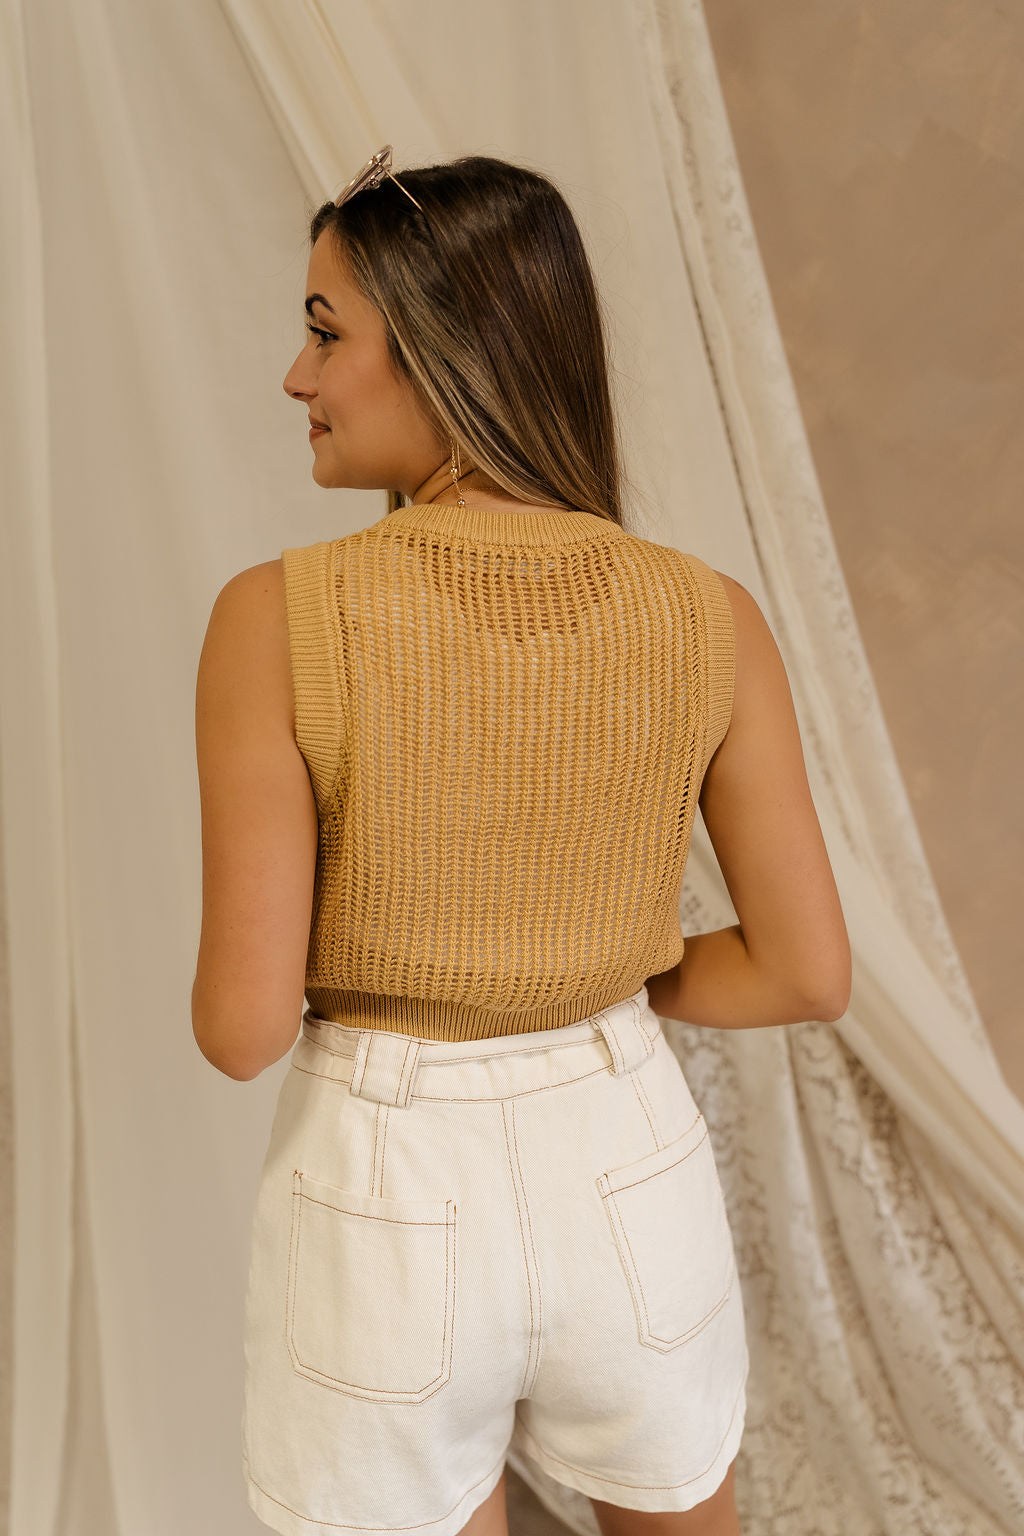 Back view of model wearing the Heidi Mustard Open Knit Tank which has a round neckline, open knit fabric, and sleeveless body. Layered over white tank top.